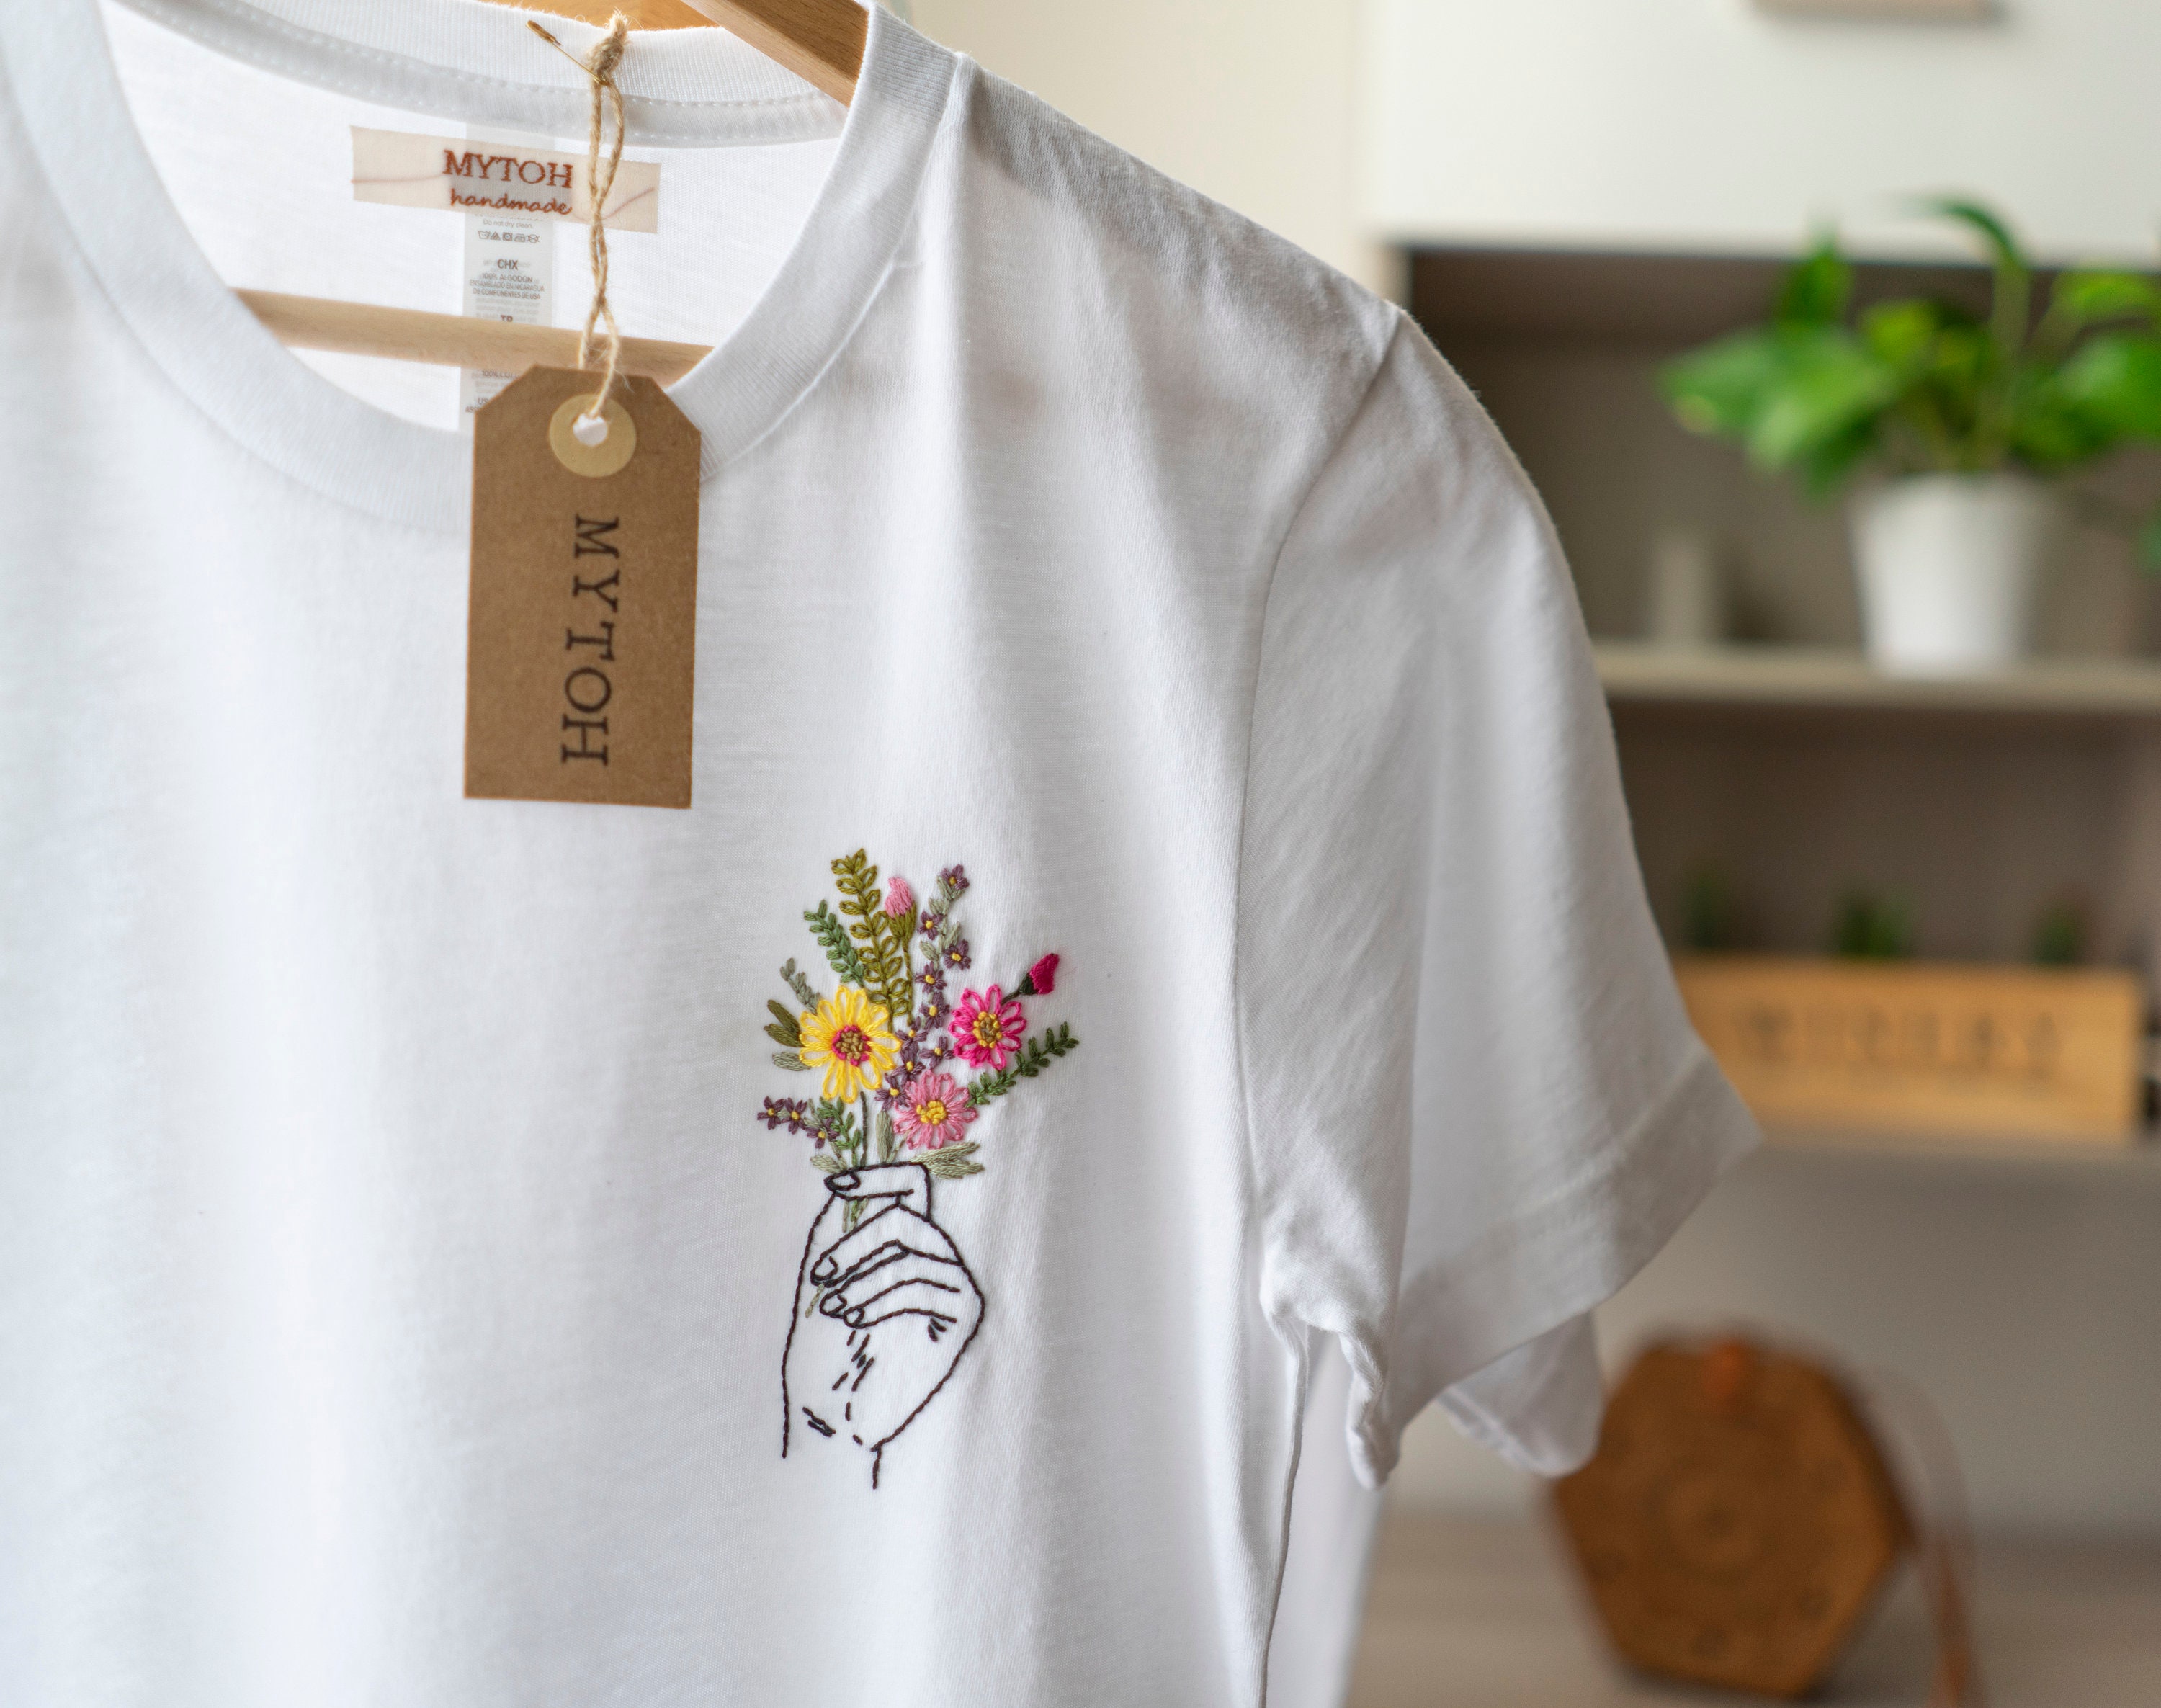 Hand-embroidered T-shirt/ Customized T-shirt / Made in Italy / Flower's T- shirt / Embroidered Tshirt 